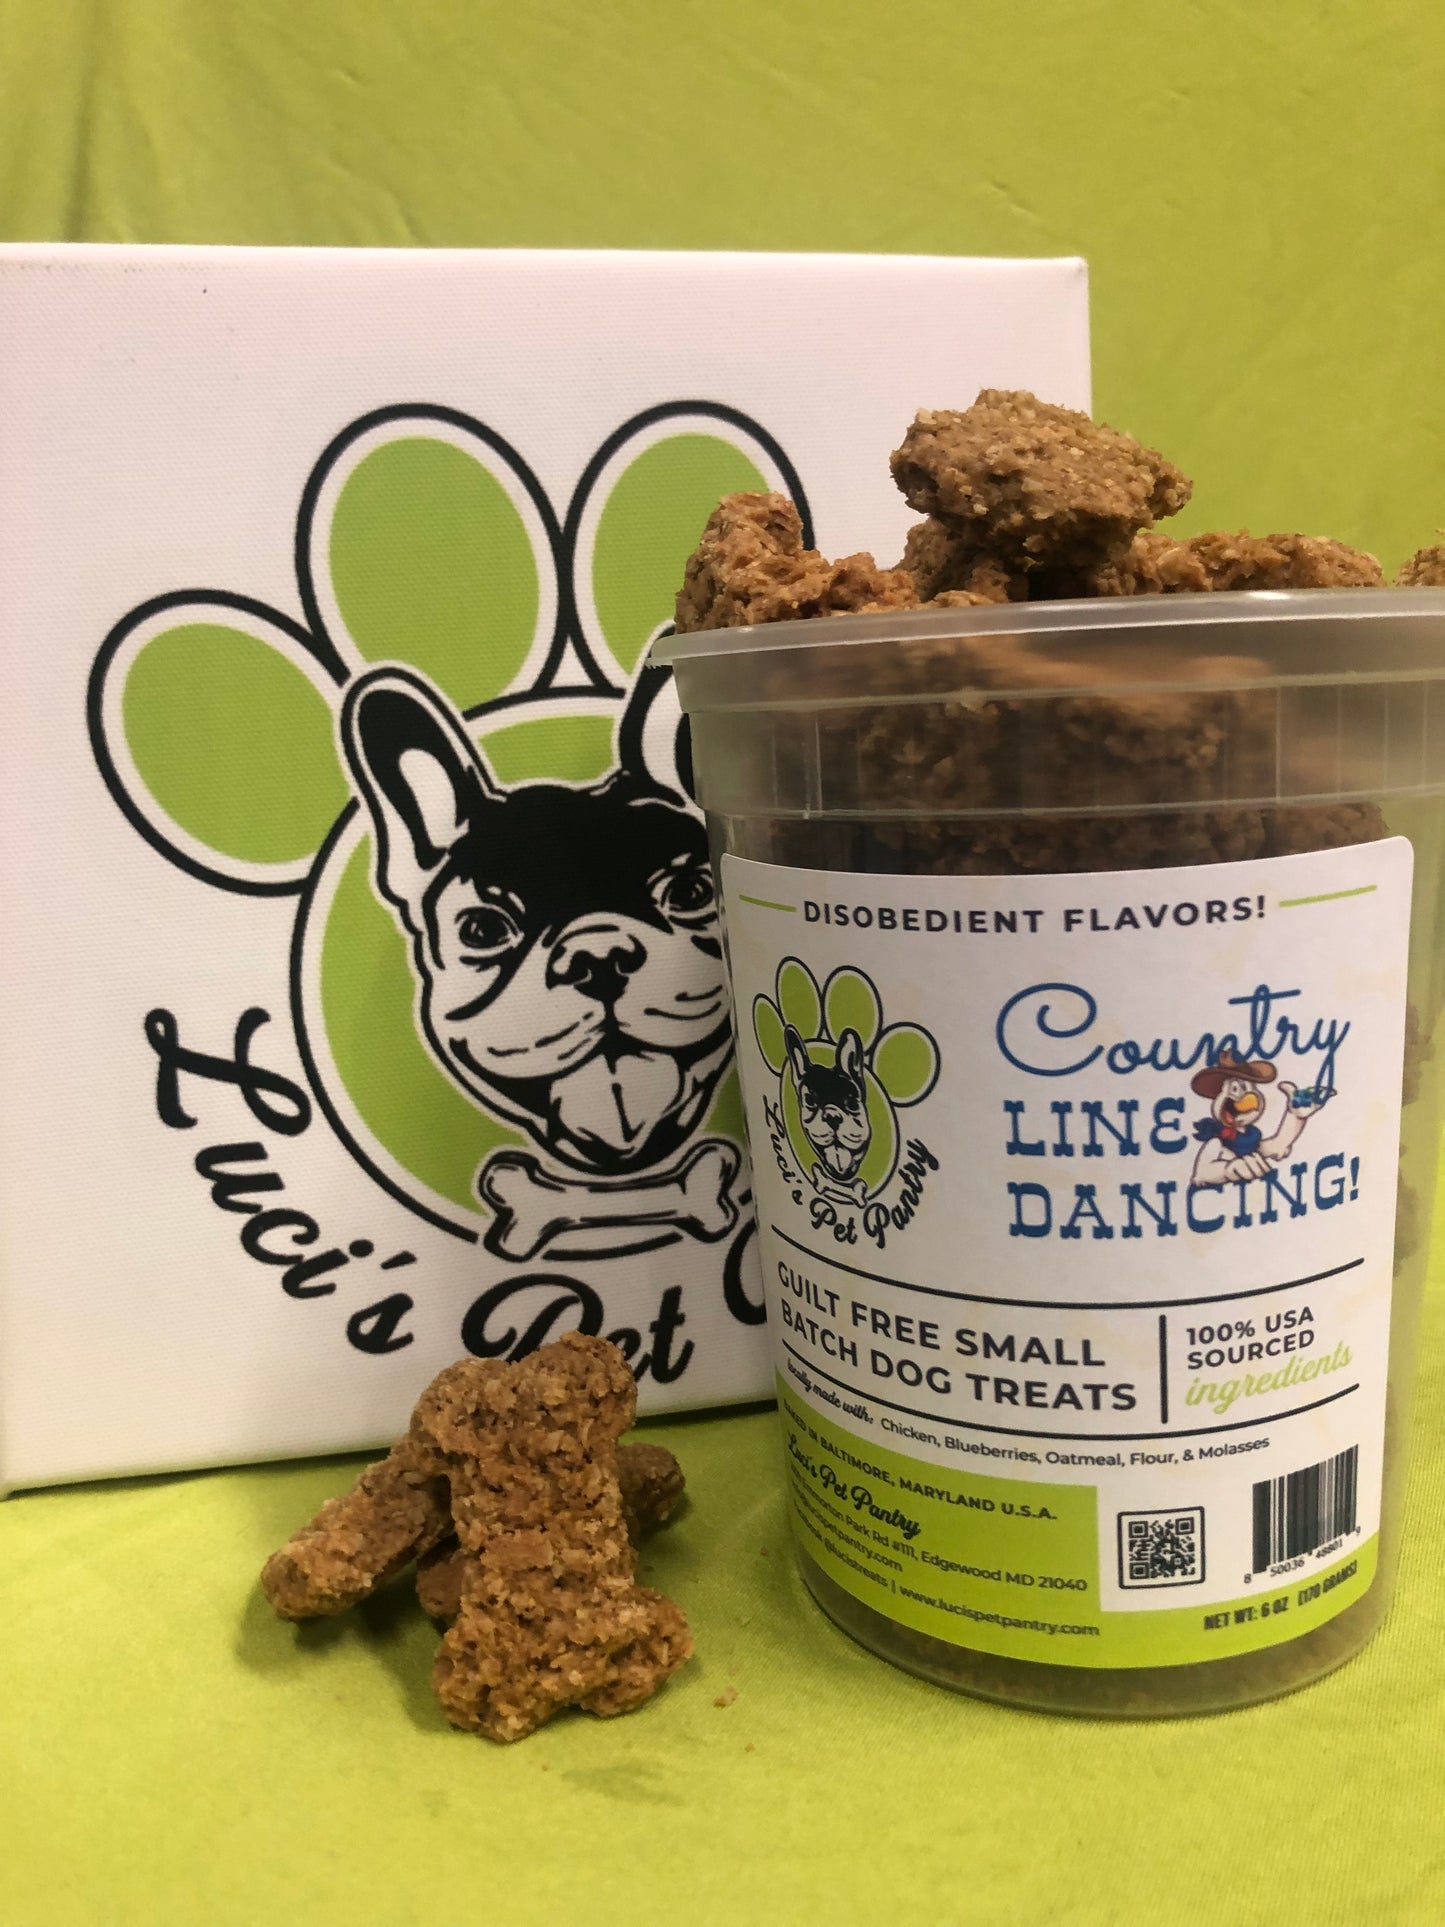 Country Line Dancing - All Natural "Chicken & Blueberry" Dog & Puppy Treats - Disobedient Tub of Biscuits